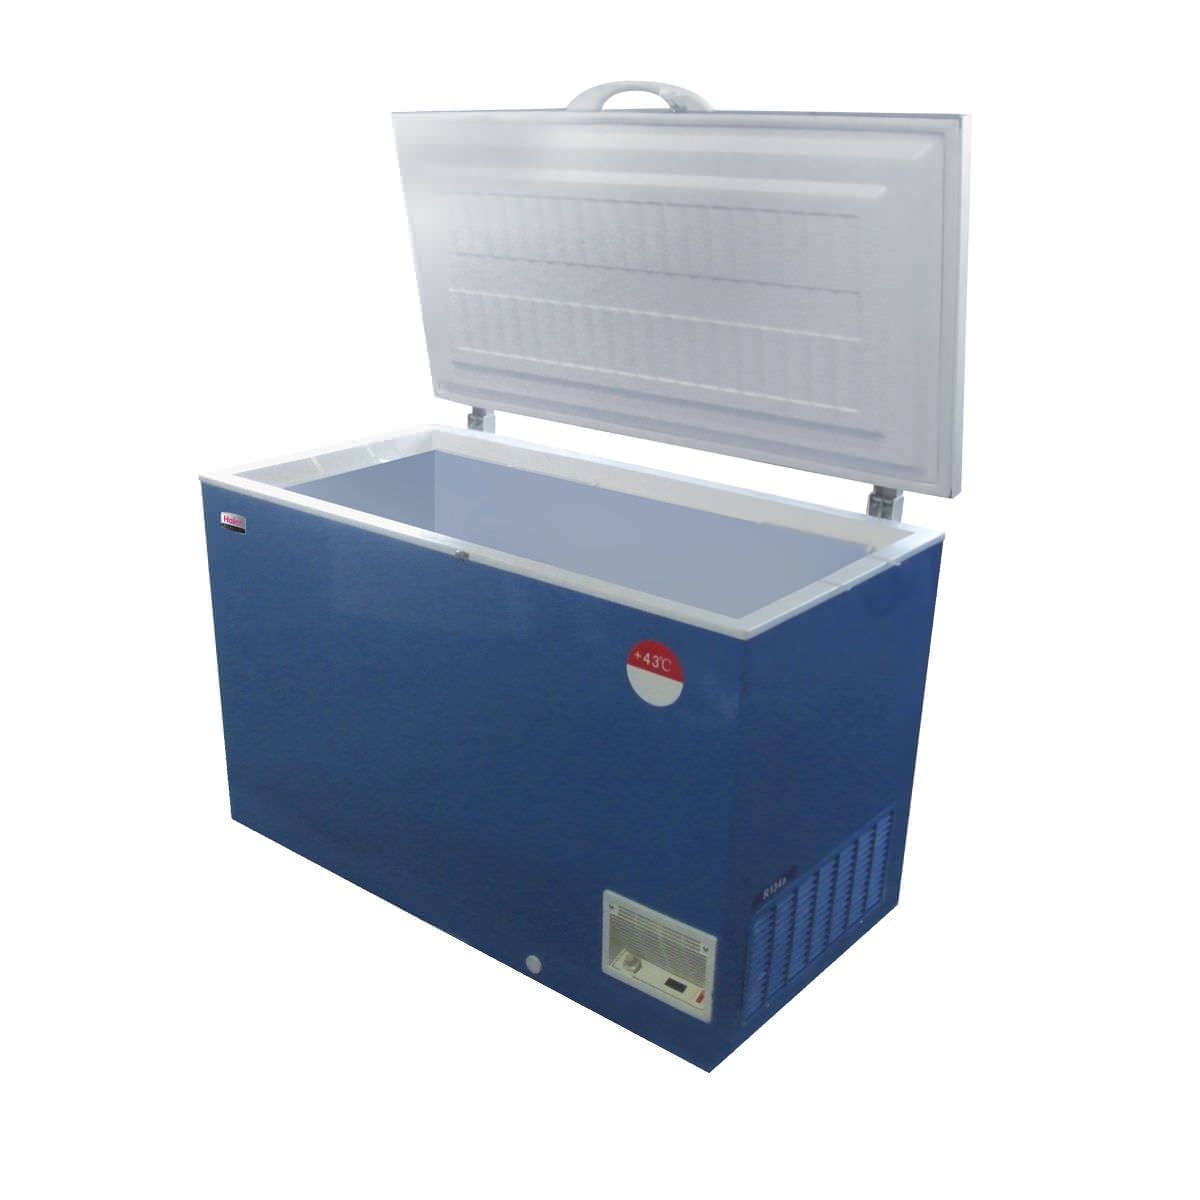 Vaccine freezer / box / 1-door -15 °C ... -25 °C, 258 L | HBD-286 Haier Medical and Laboratory Products